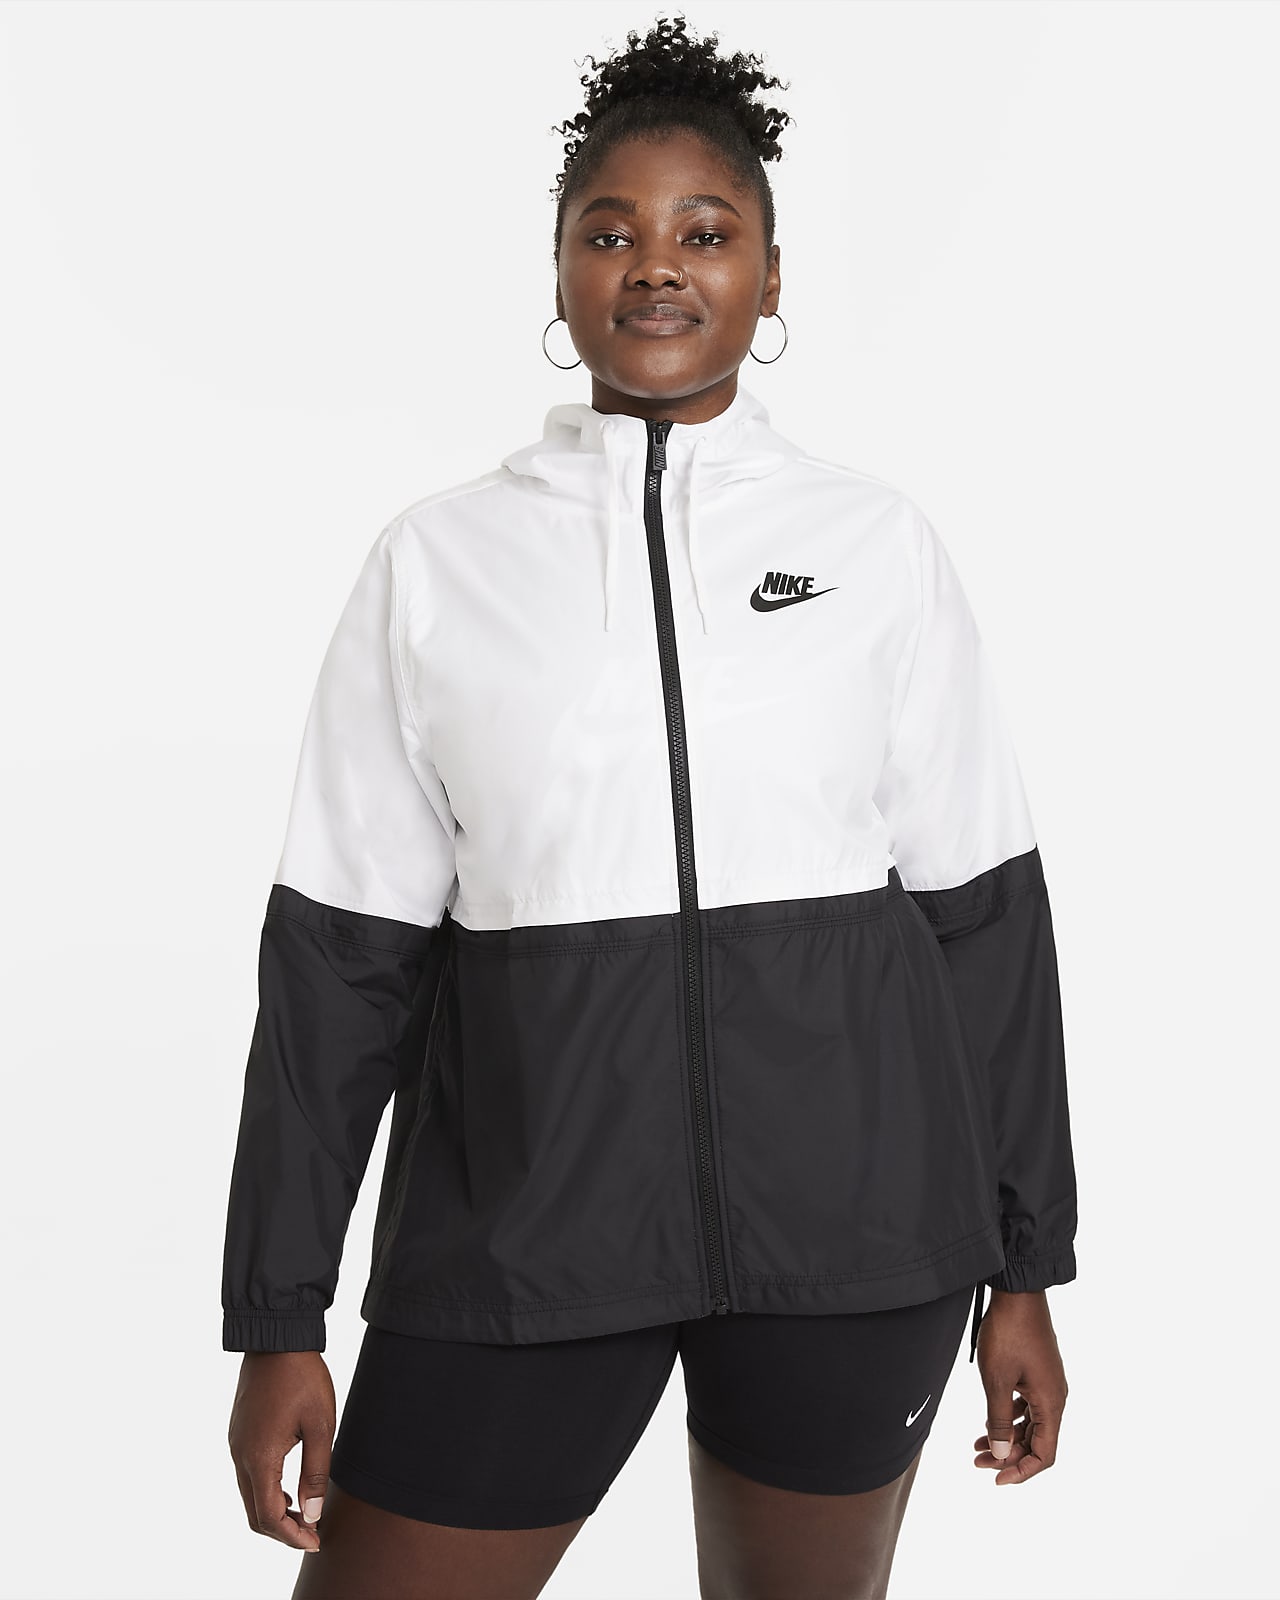 https://static.nike.com/a/images/t_PDP_1280_v1/f_auto,q_auto:eco/2ac82ed1-f0ca-4af5-bb32-5a747df6122d/sportswear-womens-woven-jacket-plus-size-lDzkqK.png